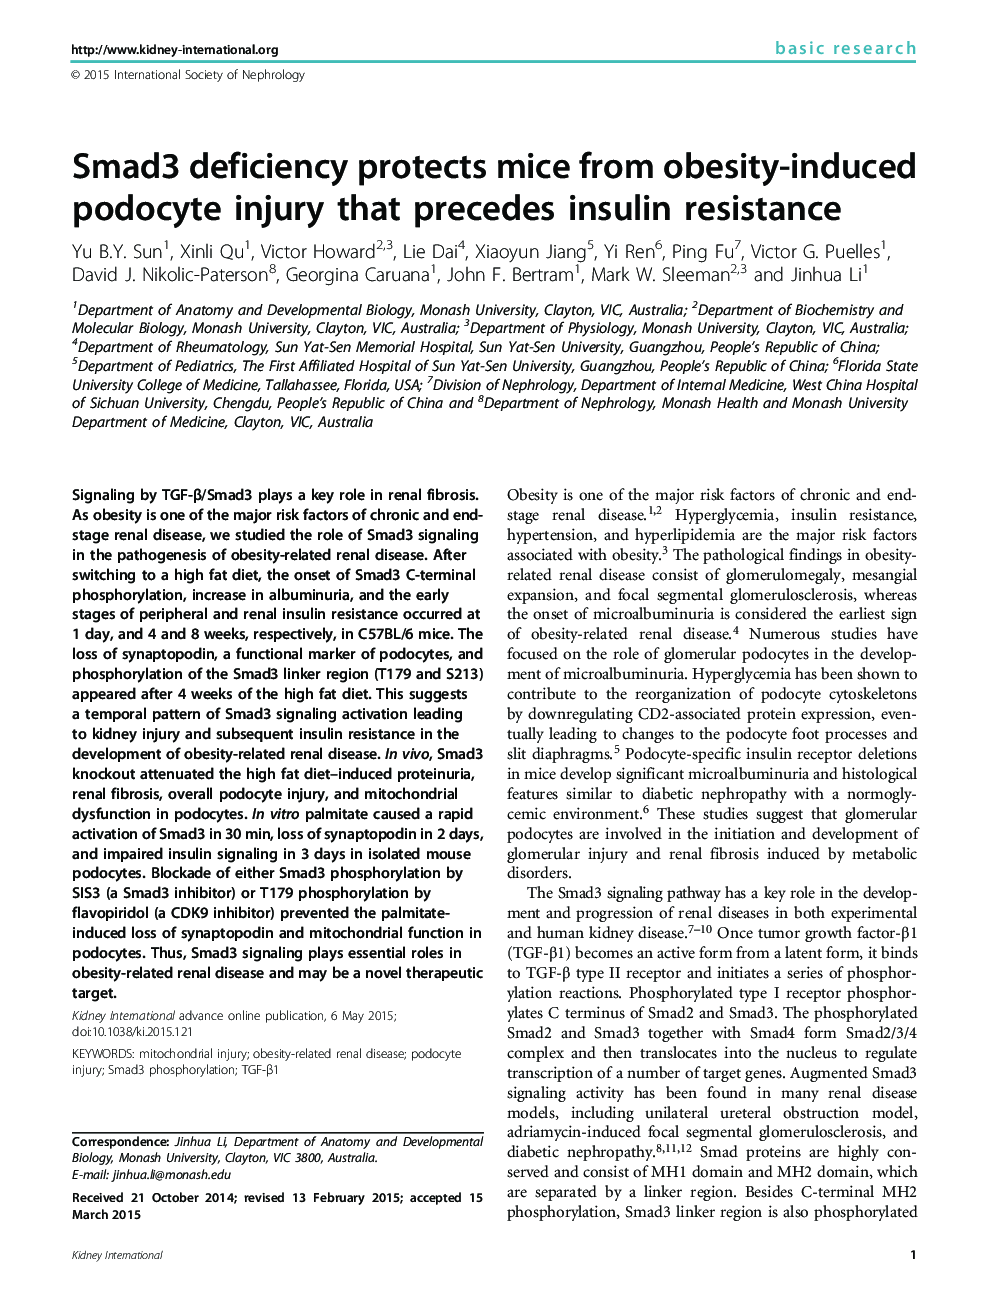 Smad3 deficiency protects mice from obesity-induced podocyte injury that precedes insulin resistance